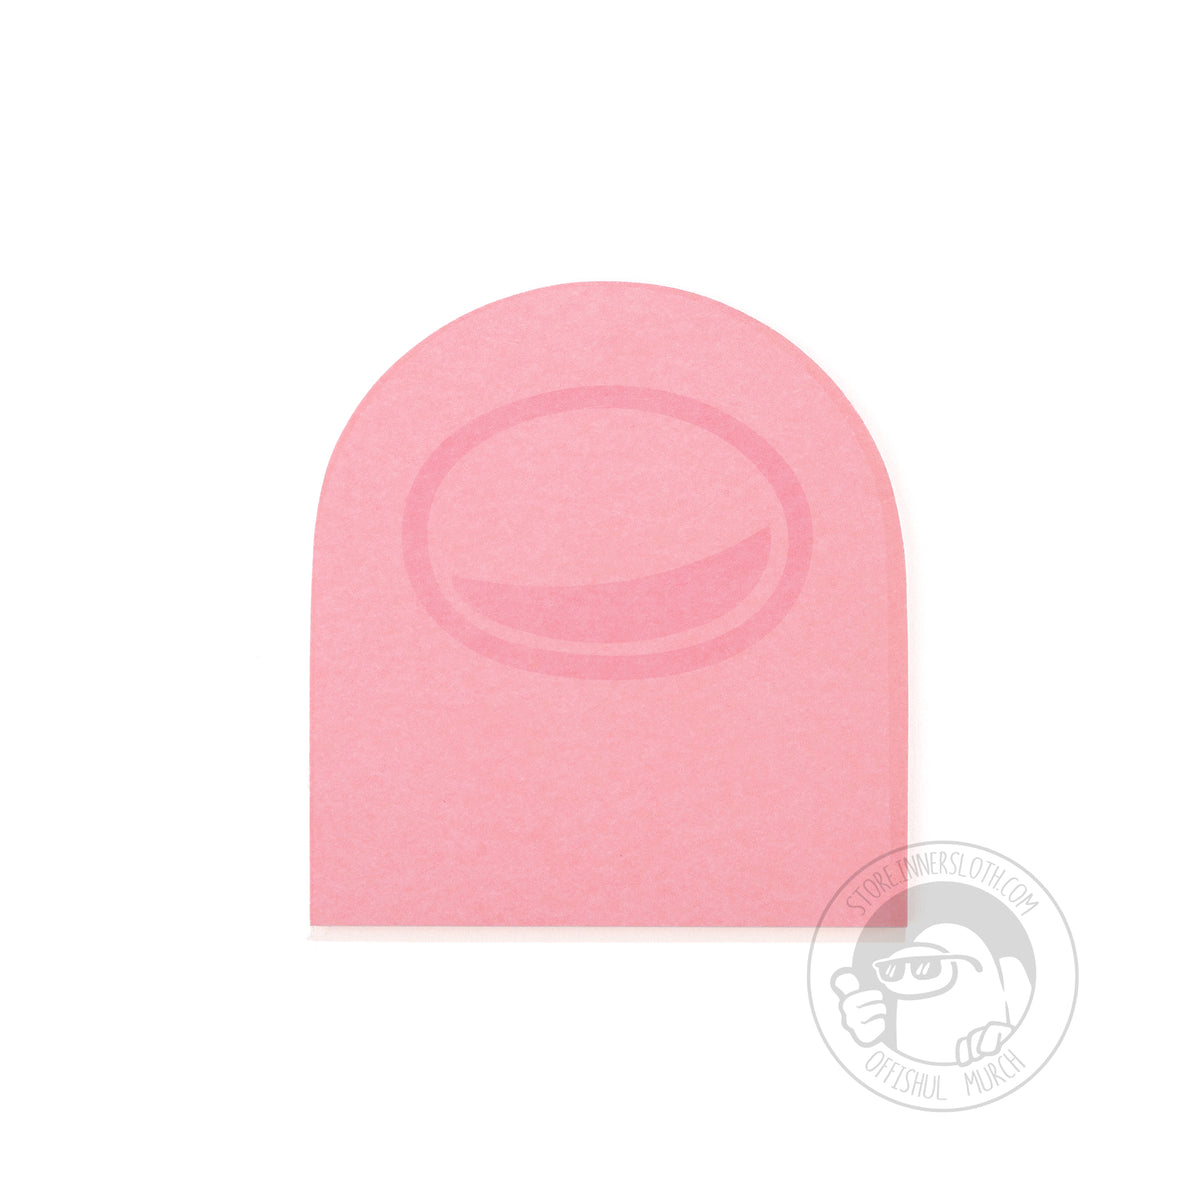 A product photo of the pink pack of Crewmate Post-It Notes.